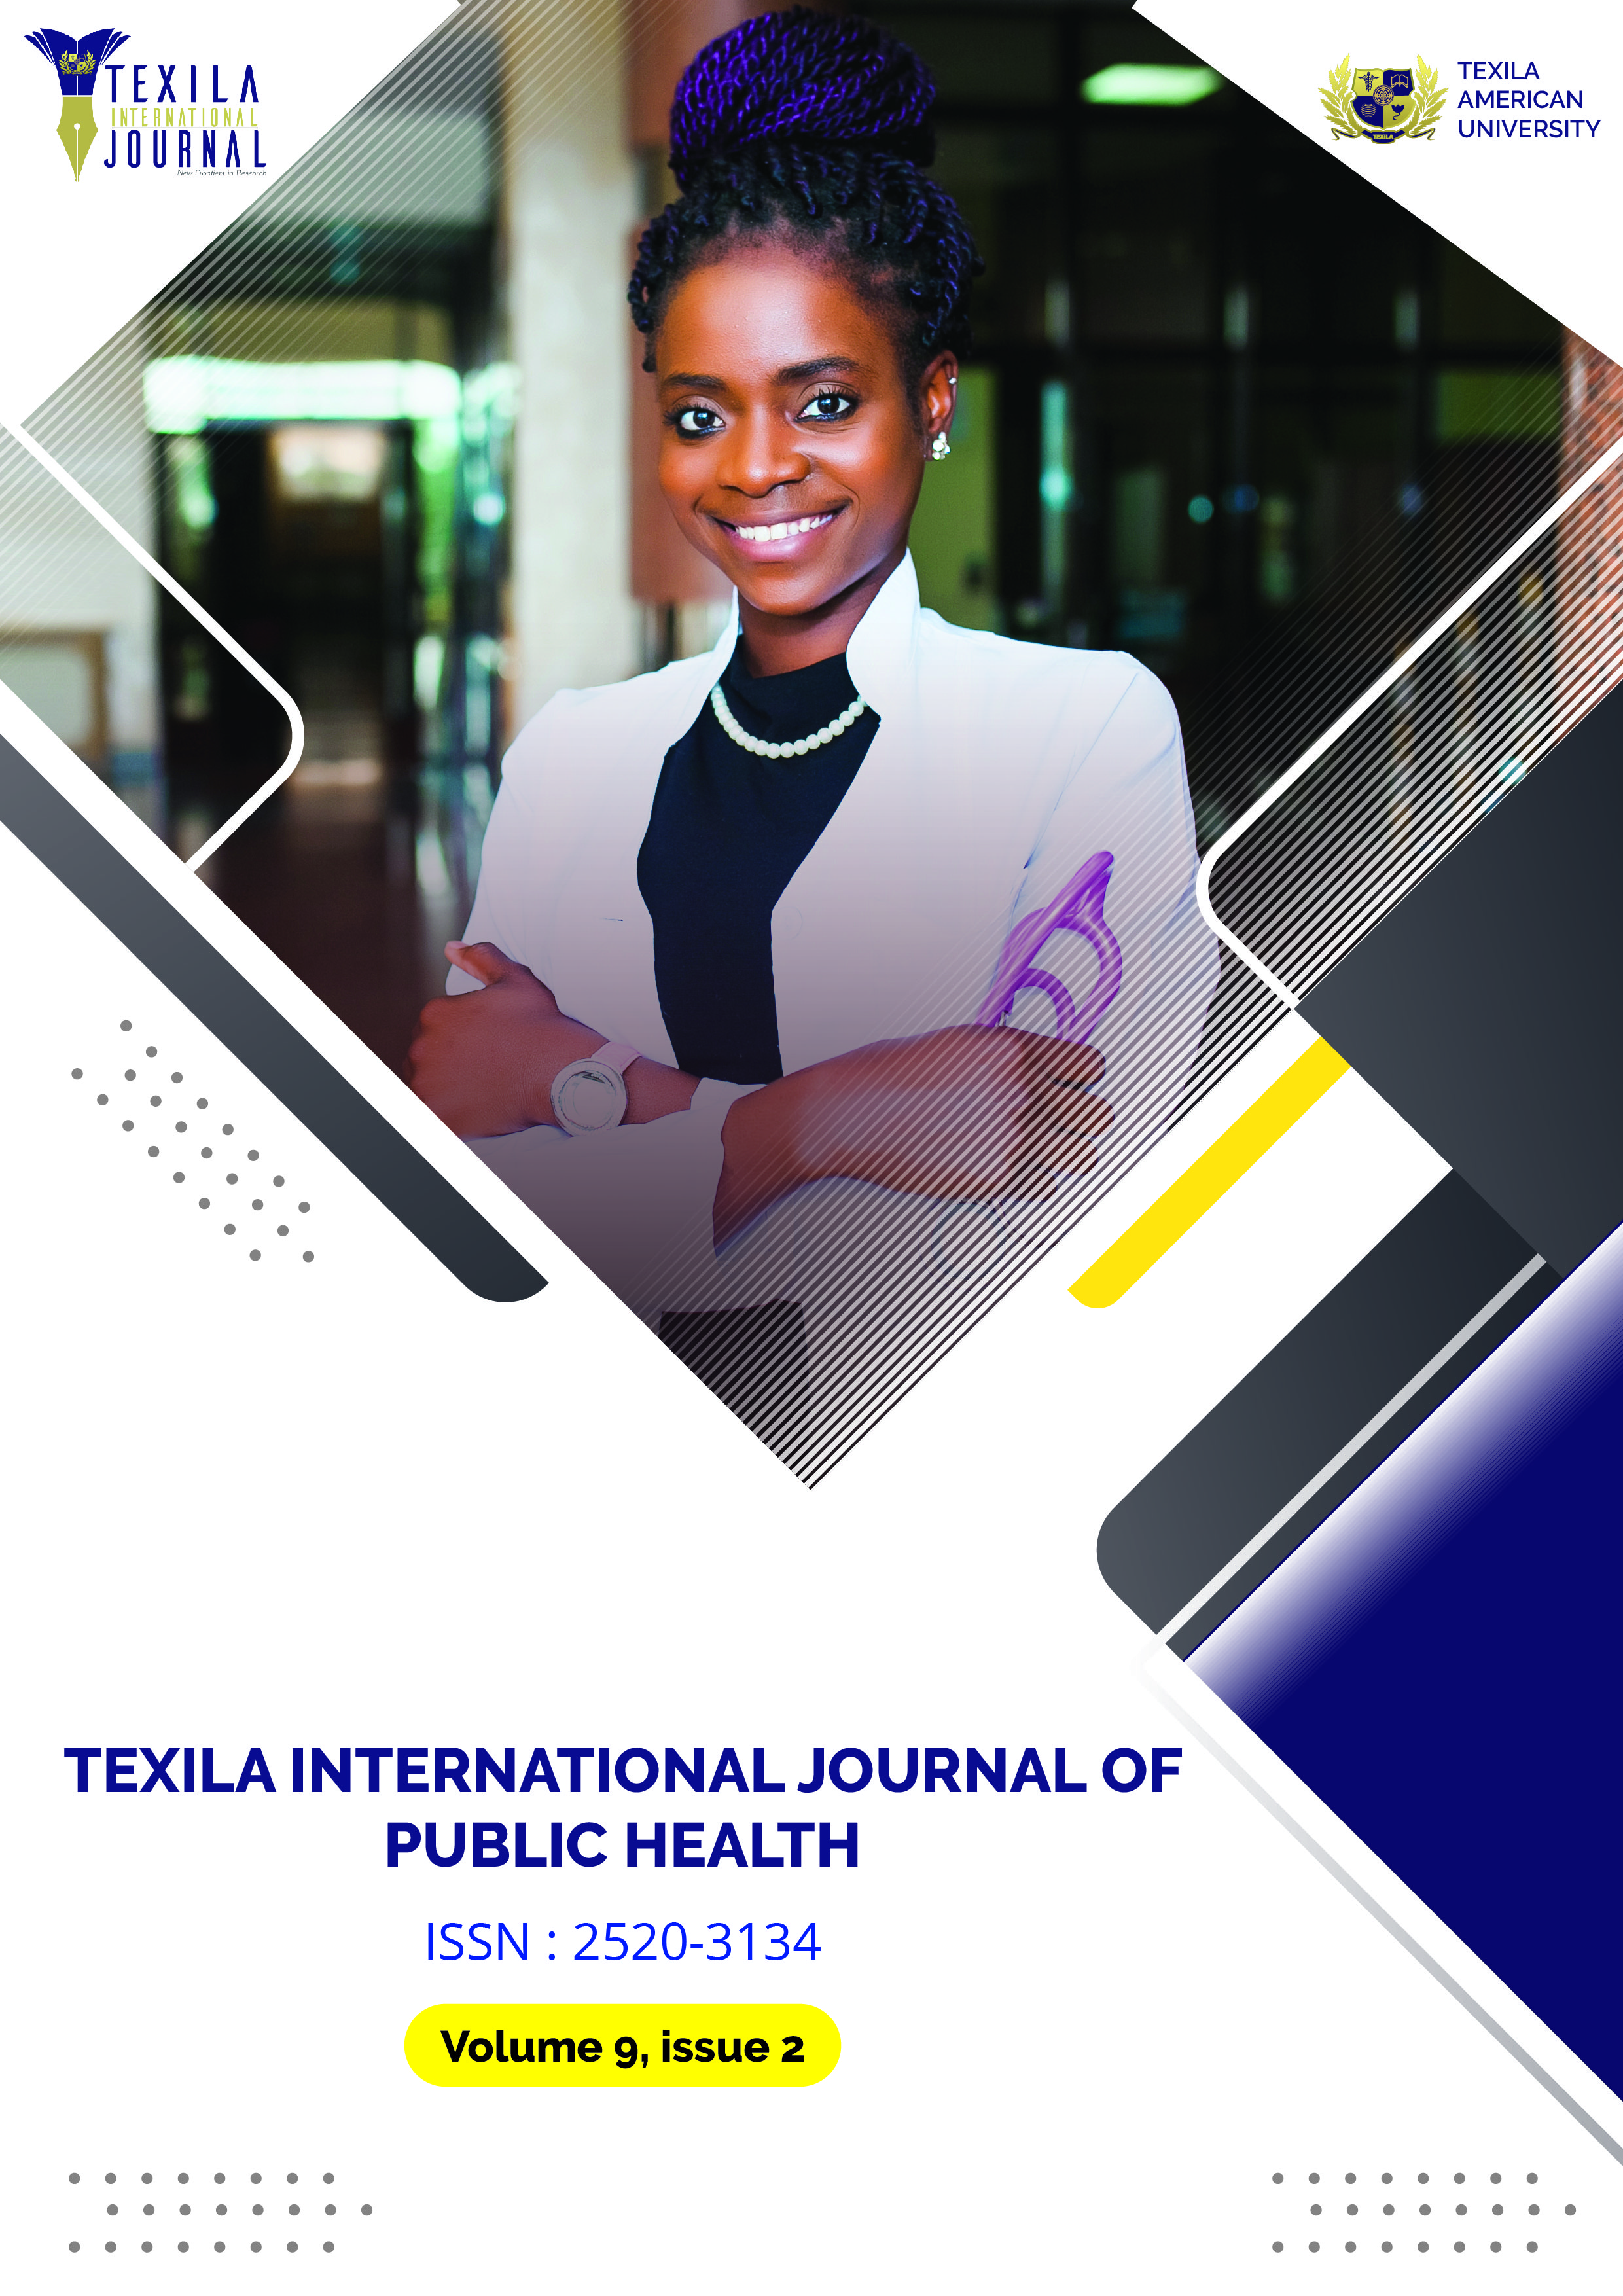 Current Issue Volume 9 Issue 2 TEXILA INTERNATIONAL JOURNAL OF PUBLIC HEALTH Texila Journal